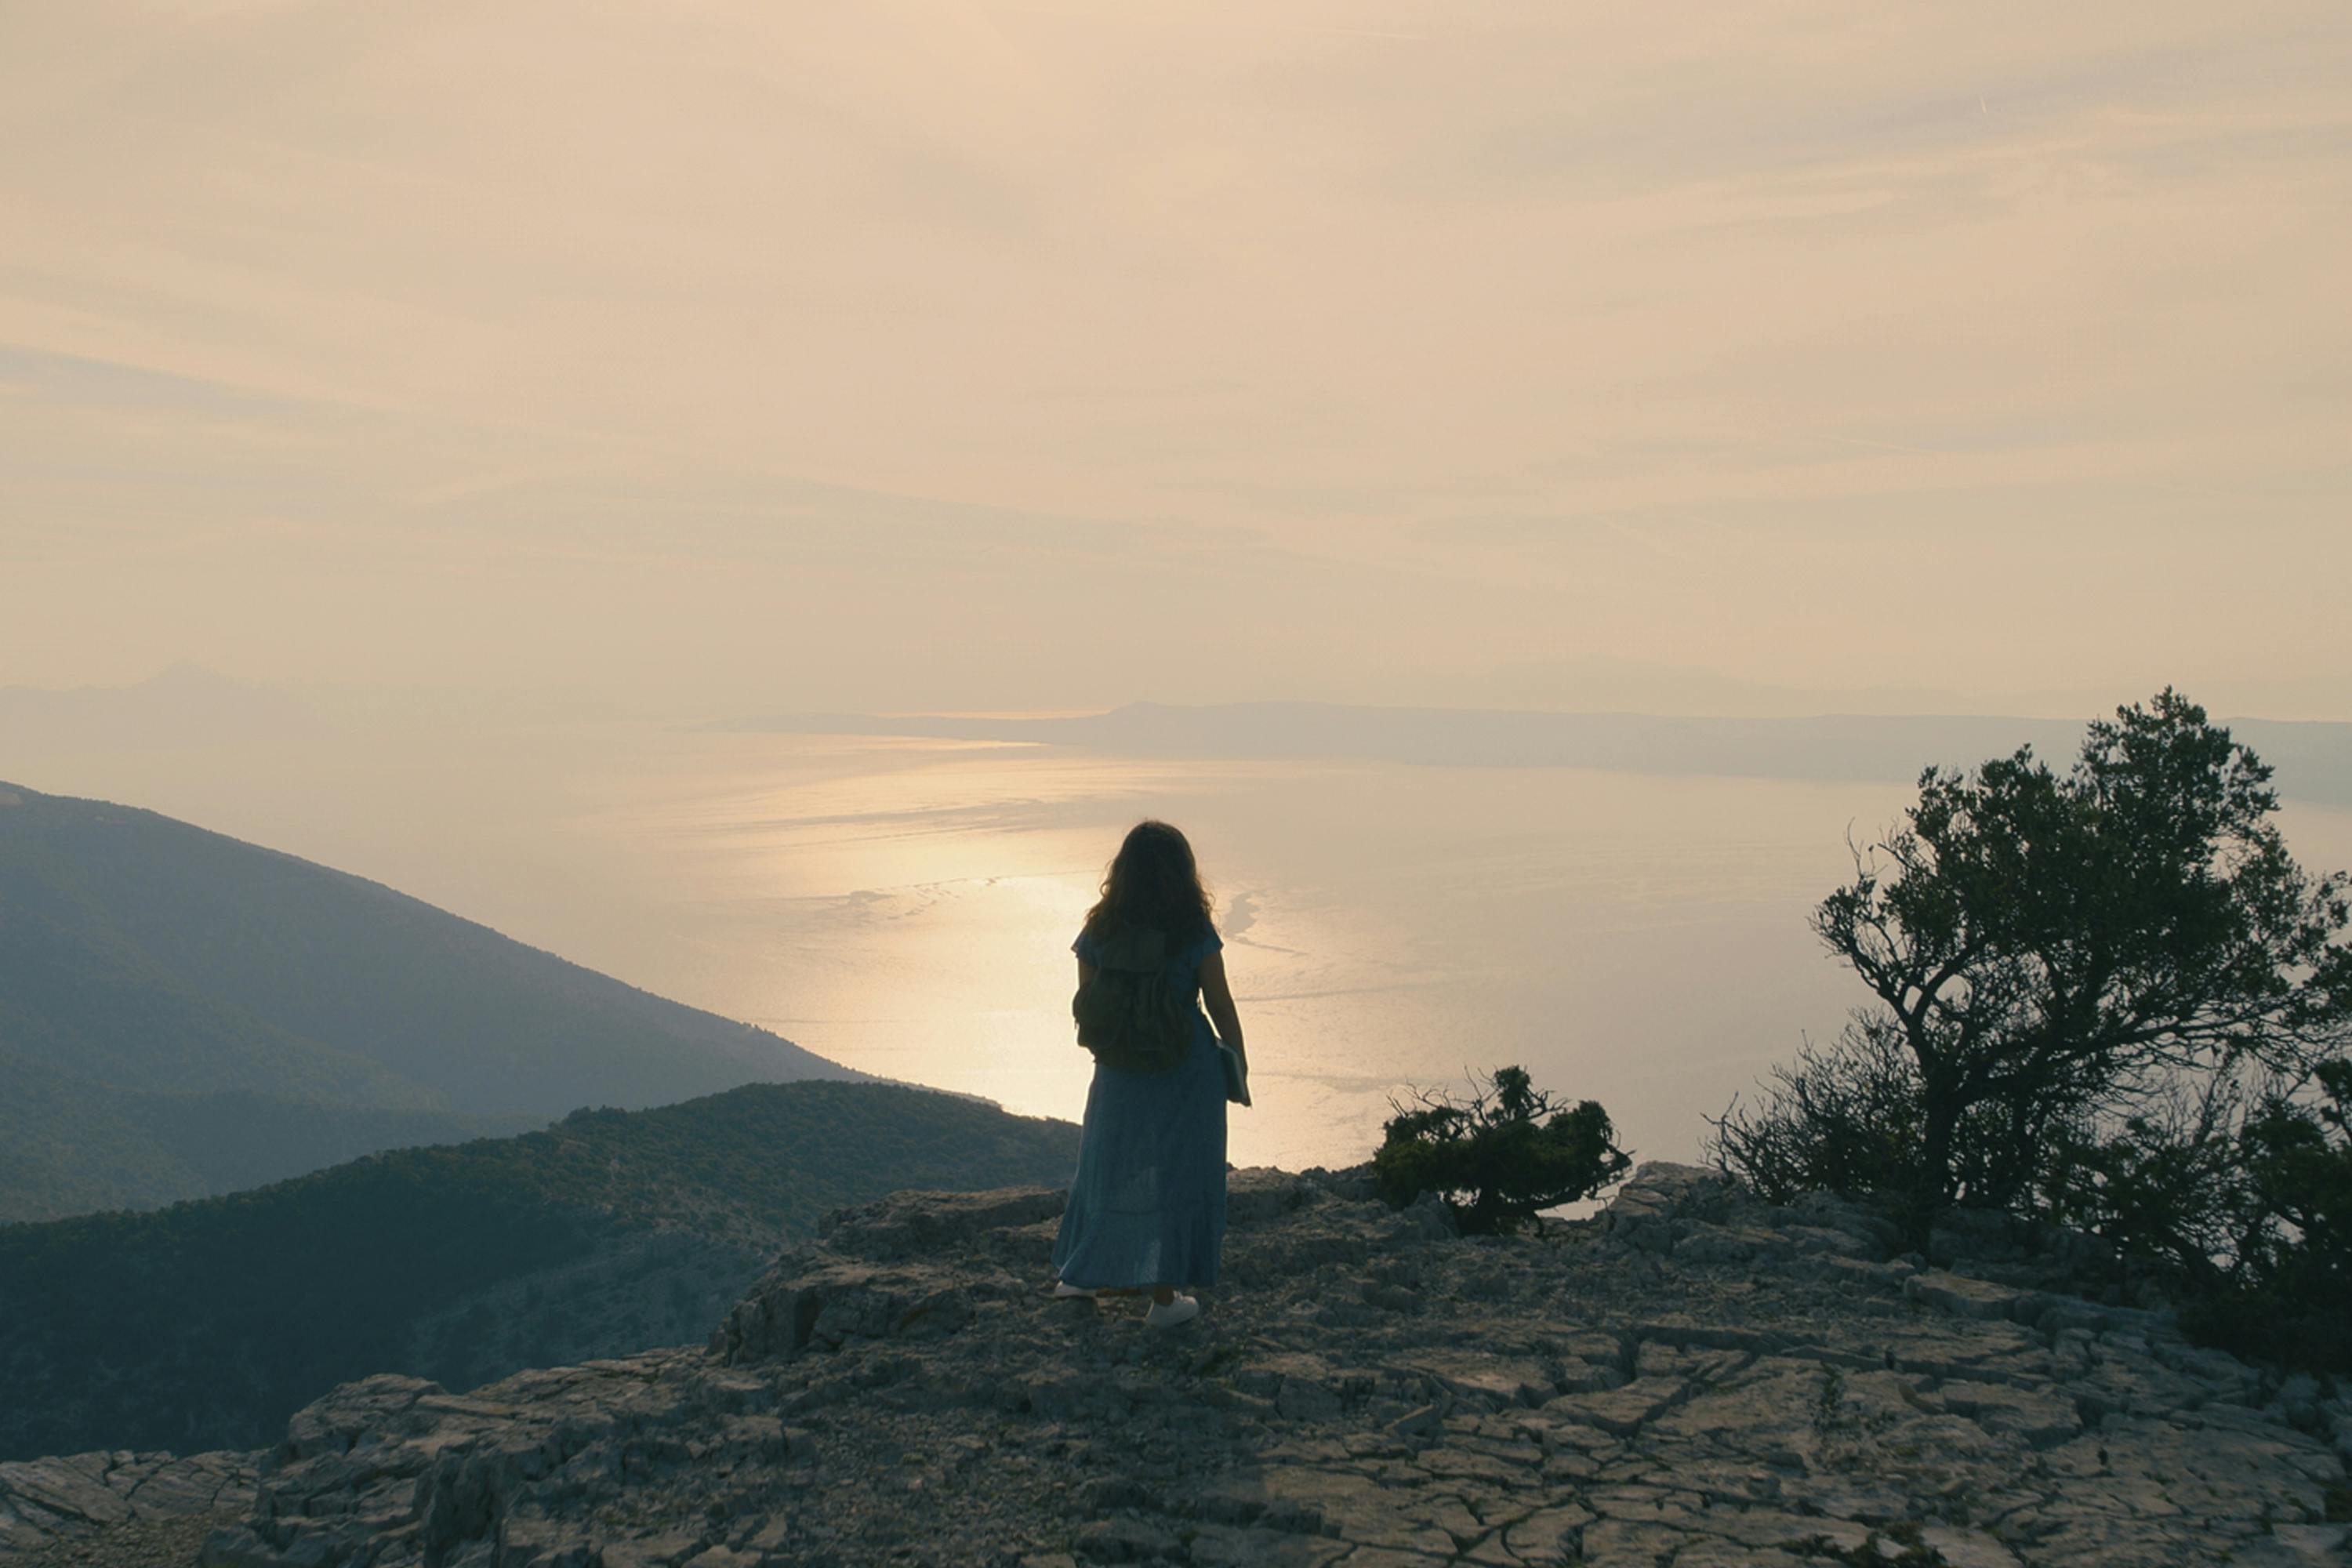 Zeynep (Naomi Krauss) stands on a cliff’s edge overlooking a beautiful sun setting on the still water.